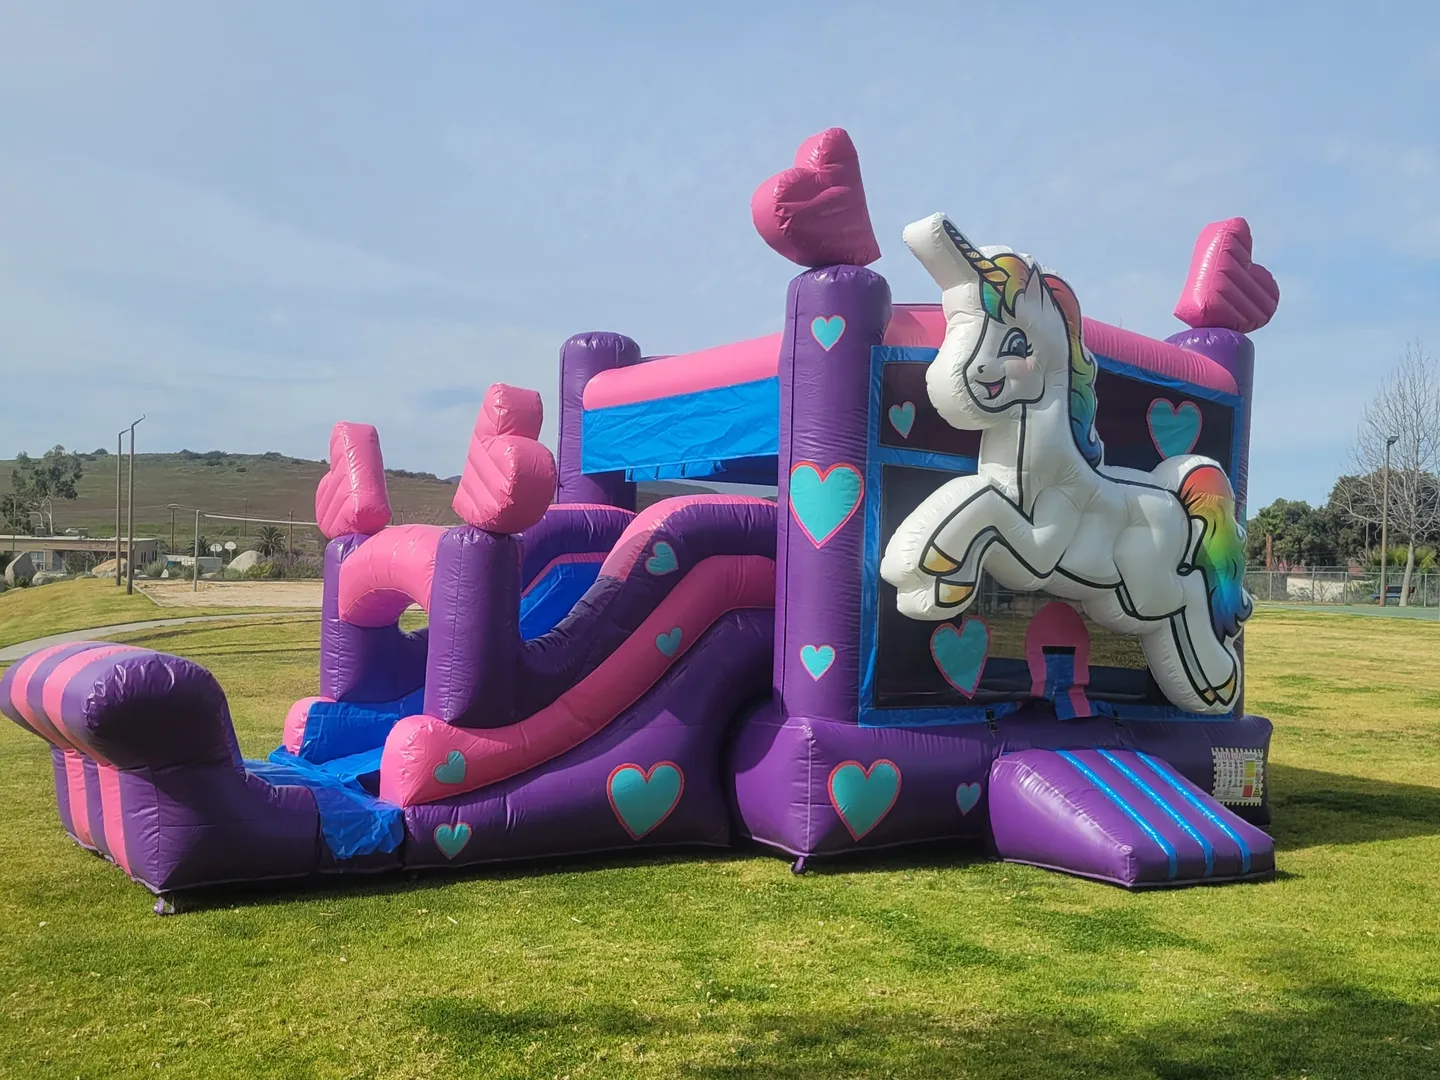 A large inflatable slide with a unicorn on it.